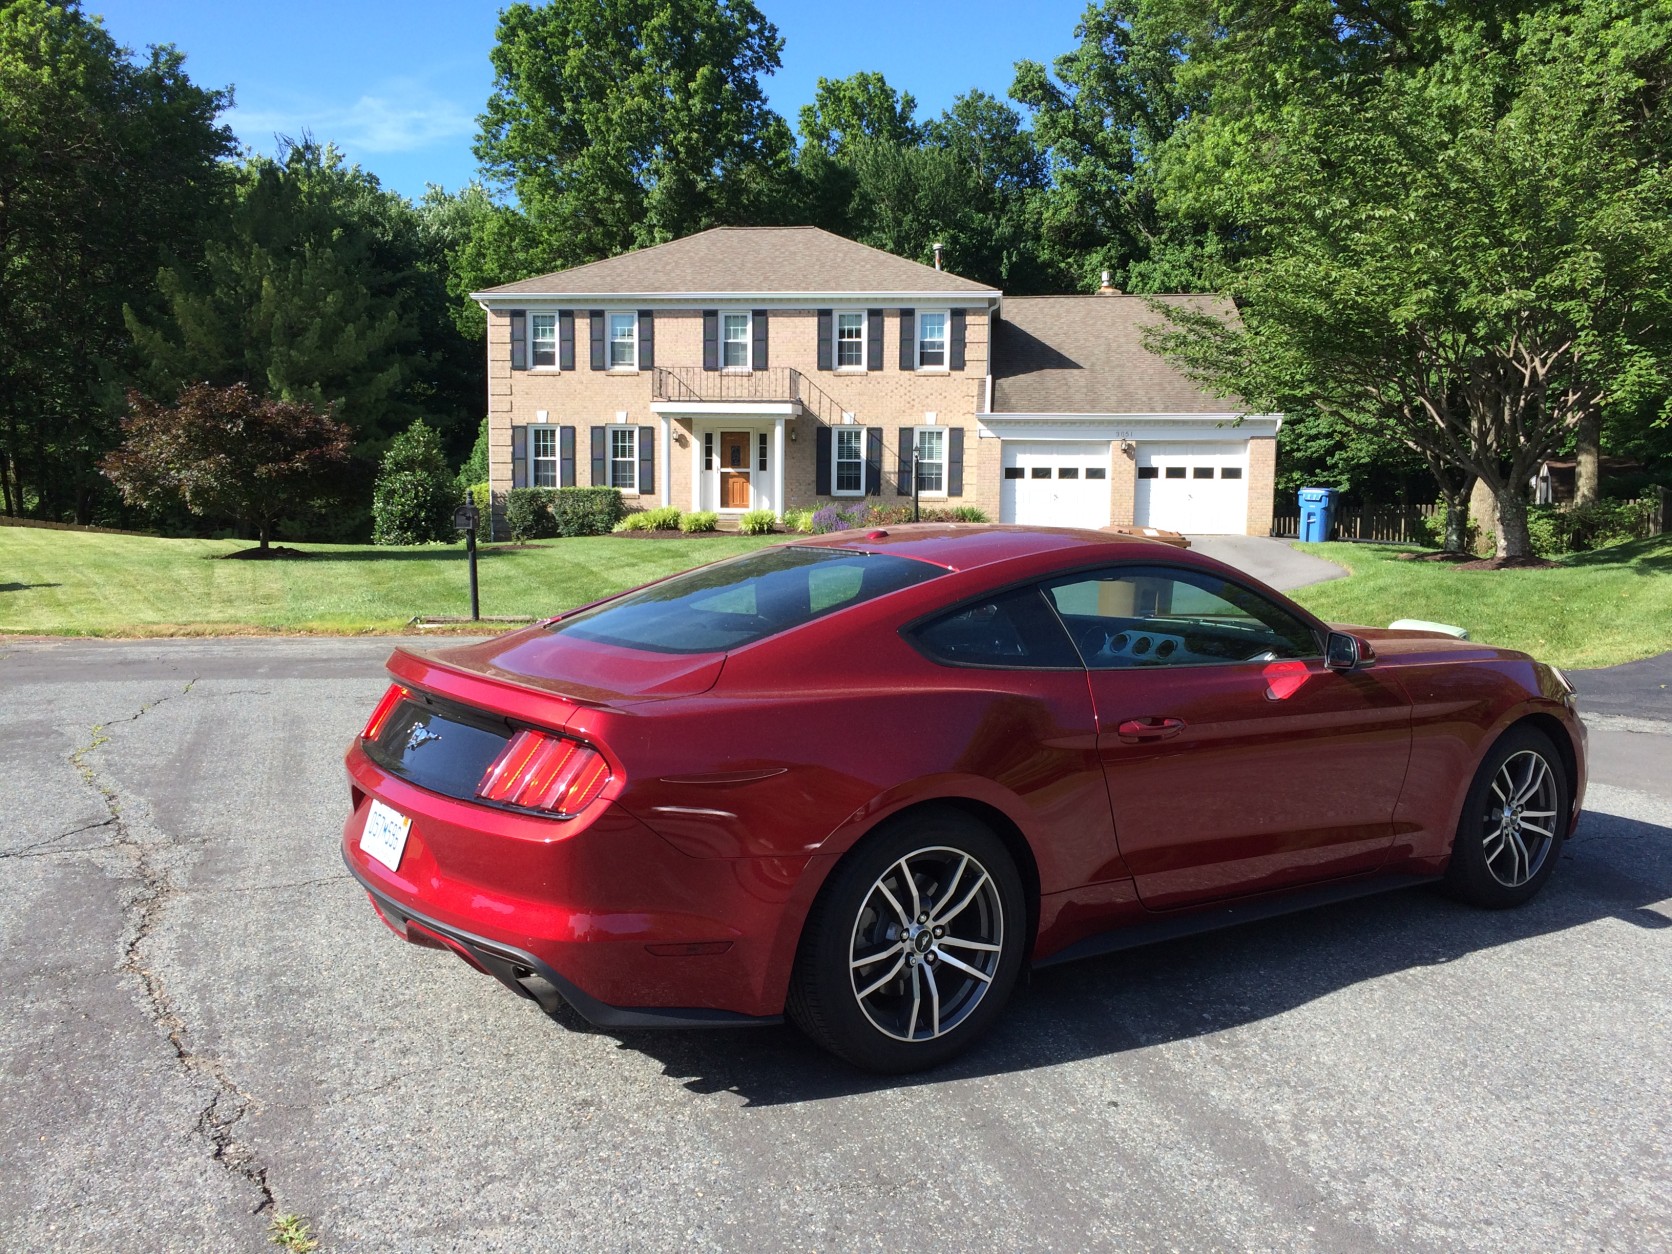 Even though it has an updated look, it still says Mustang and has the high hood line and low-slung coupe profile not to mention the signature tail lights. (WTOP/Mike Parris)